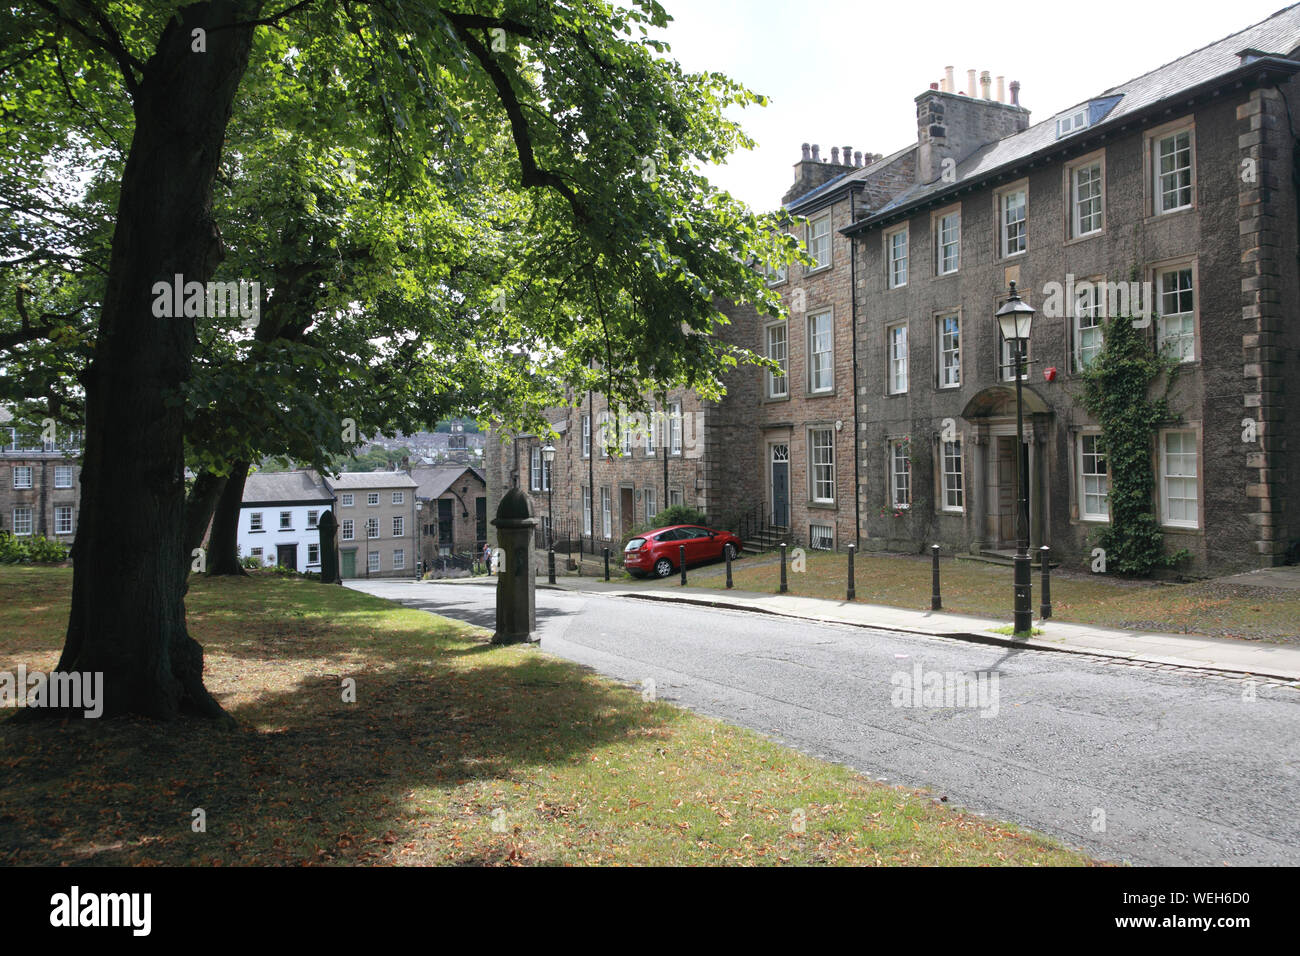 Castle park in Lancaster, a historic area next to the Castle overlooking the city. Stock Photo